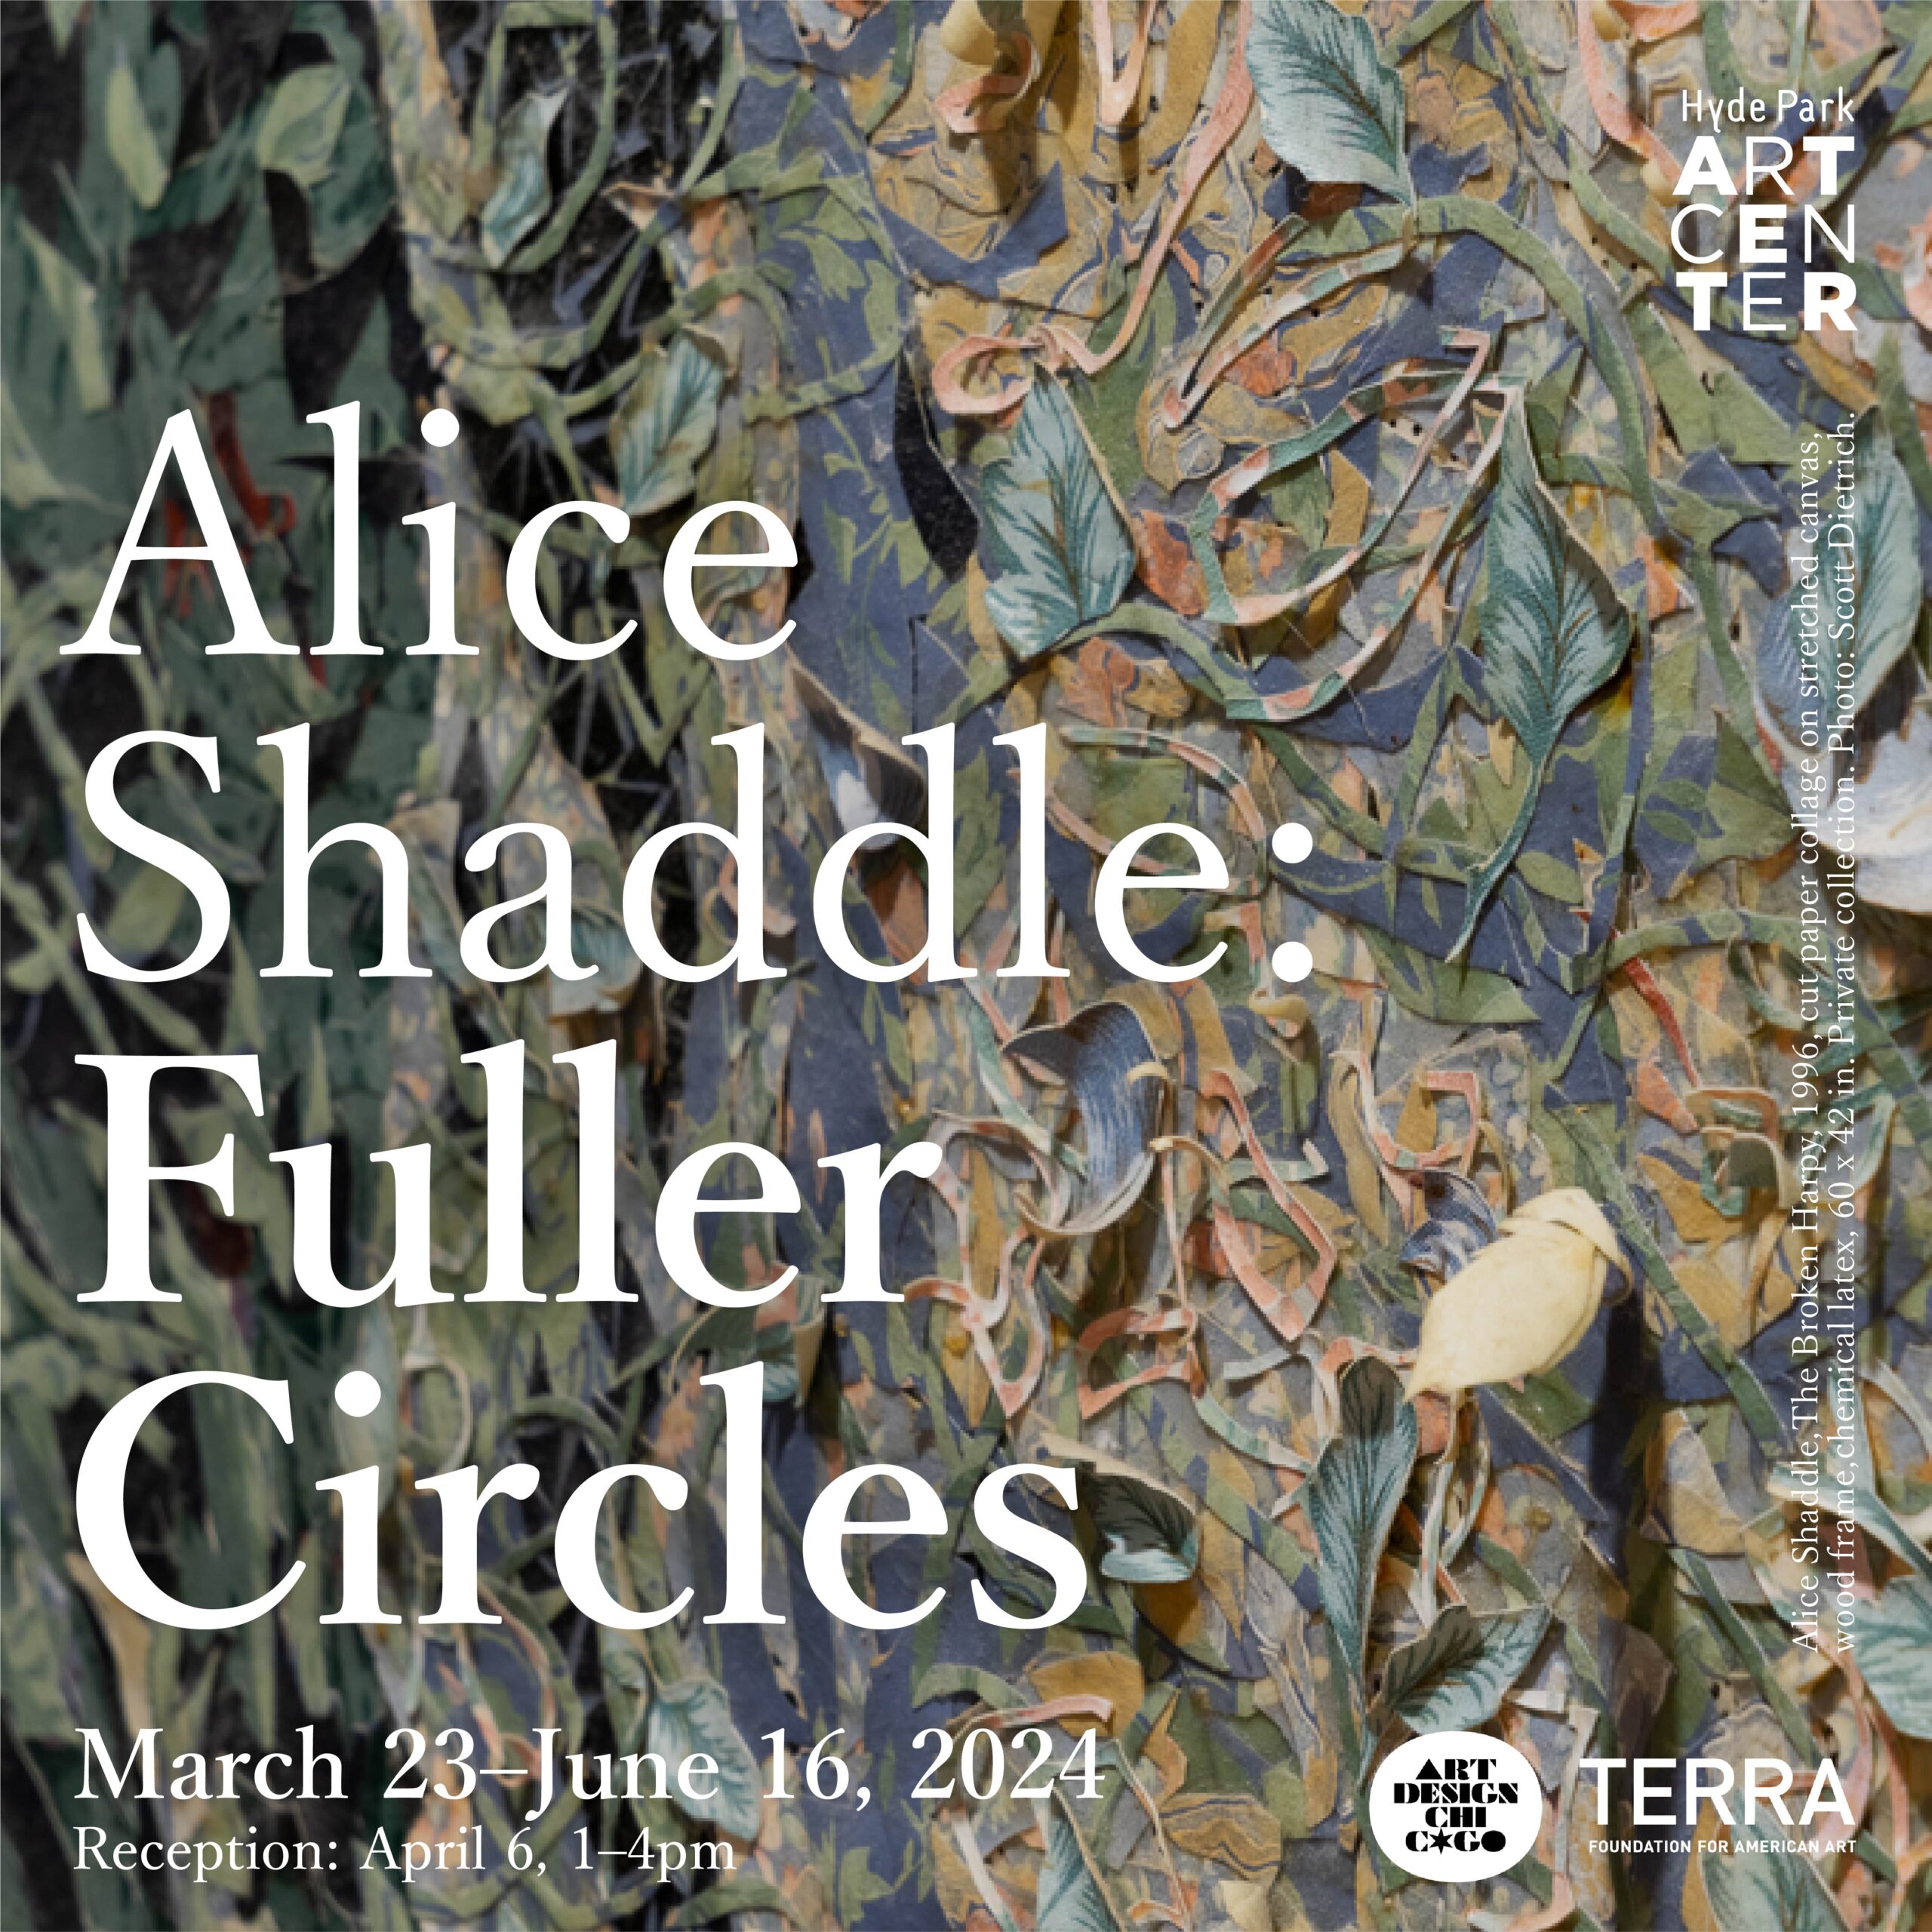 Graphic with cut paper collage background and text on top that states: "Alice Shaddle: Fuller Circles, March 23 - June 16, 2024, Reception: April 6, 1-4pm. Hyde Park Art Center logo appears in upper left. Terra Foundation and Art Design Chicago logos in lower right.